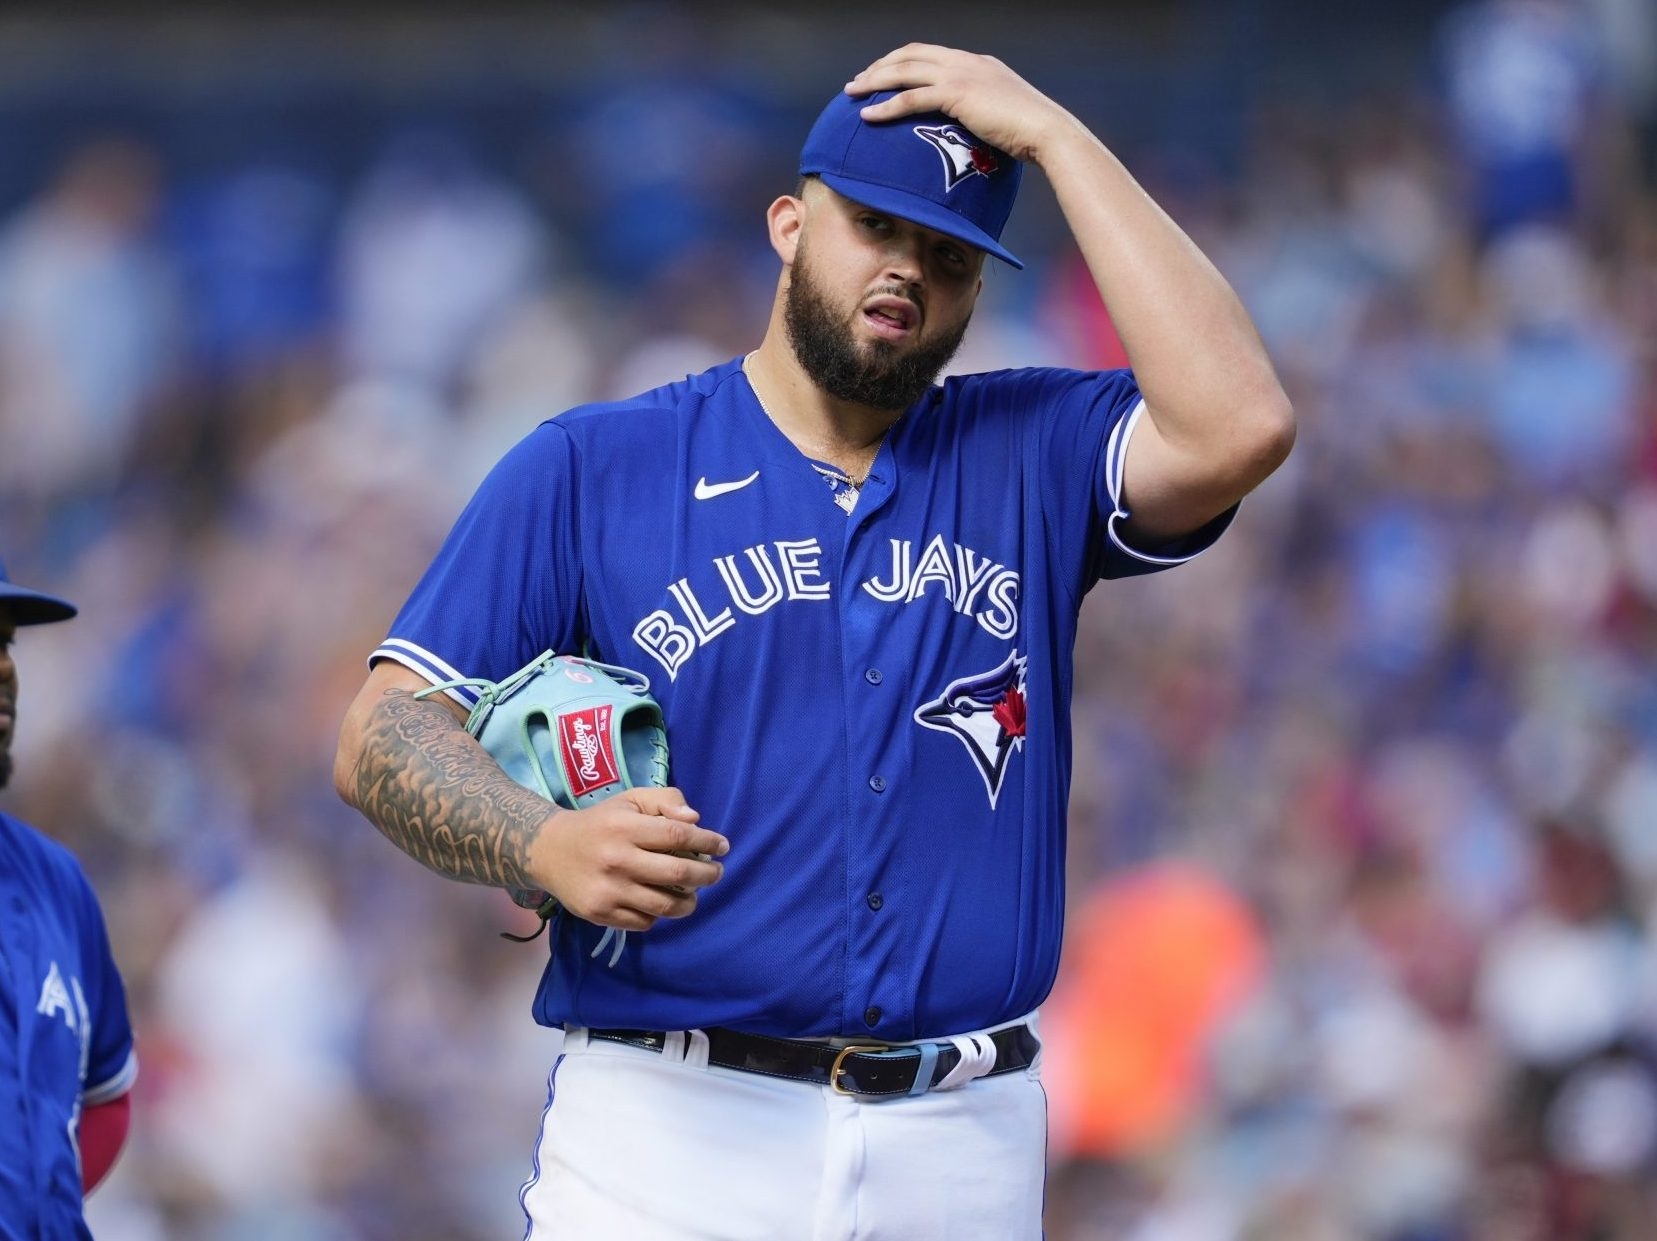 Nothing magical for Sale vs. Blue Jays